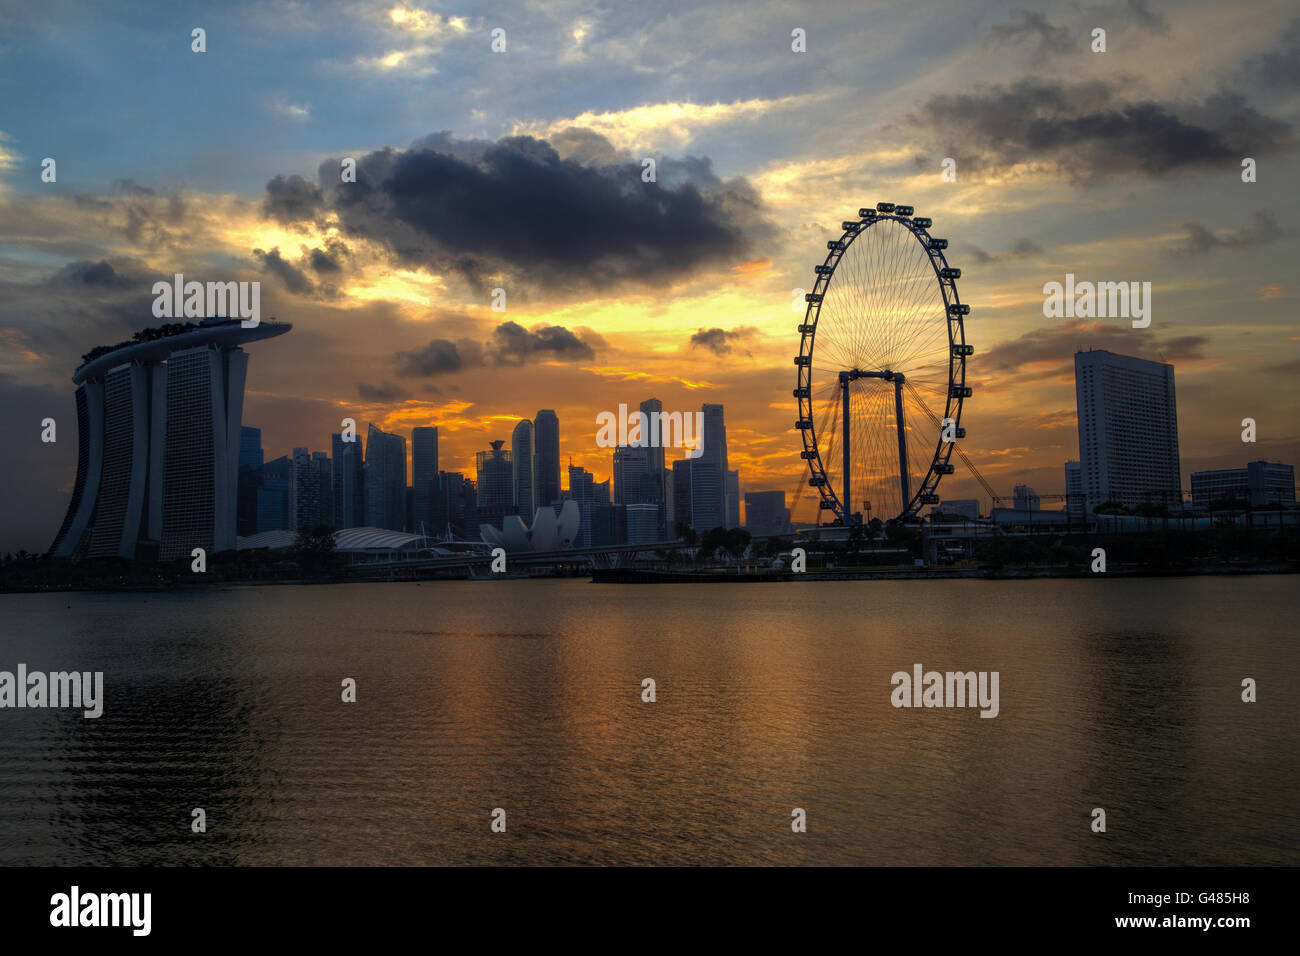 A golden sunset over Singapore's skyline creates an interesting silhouette of Marina Bay. Stock Photo